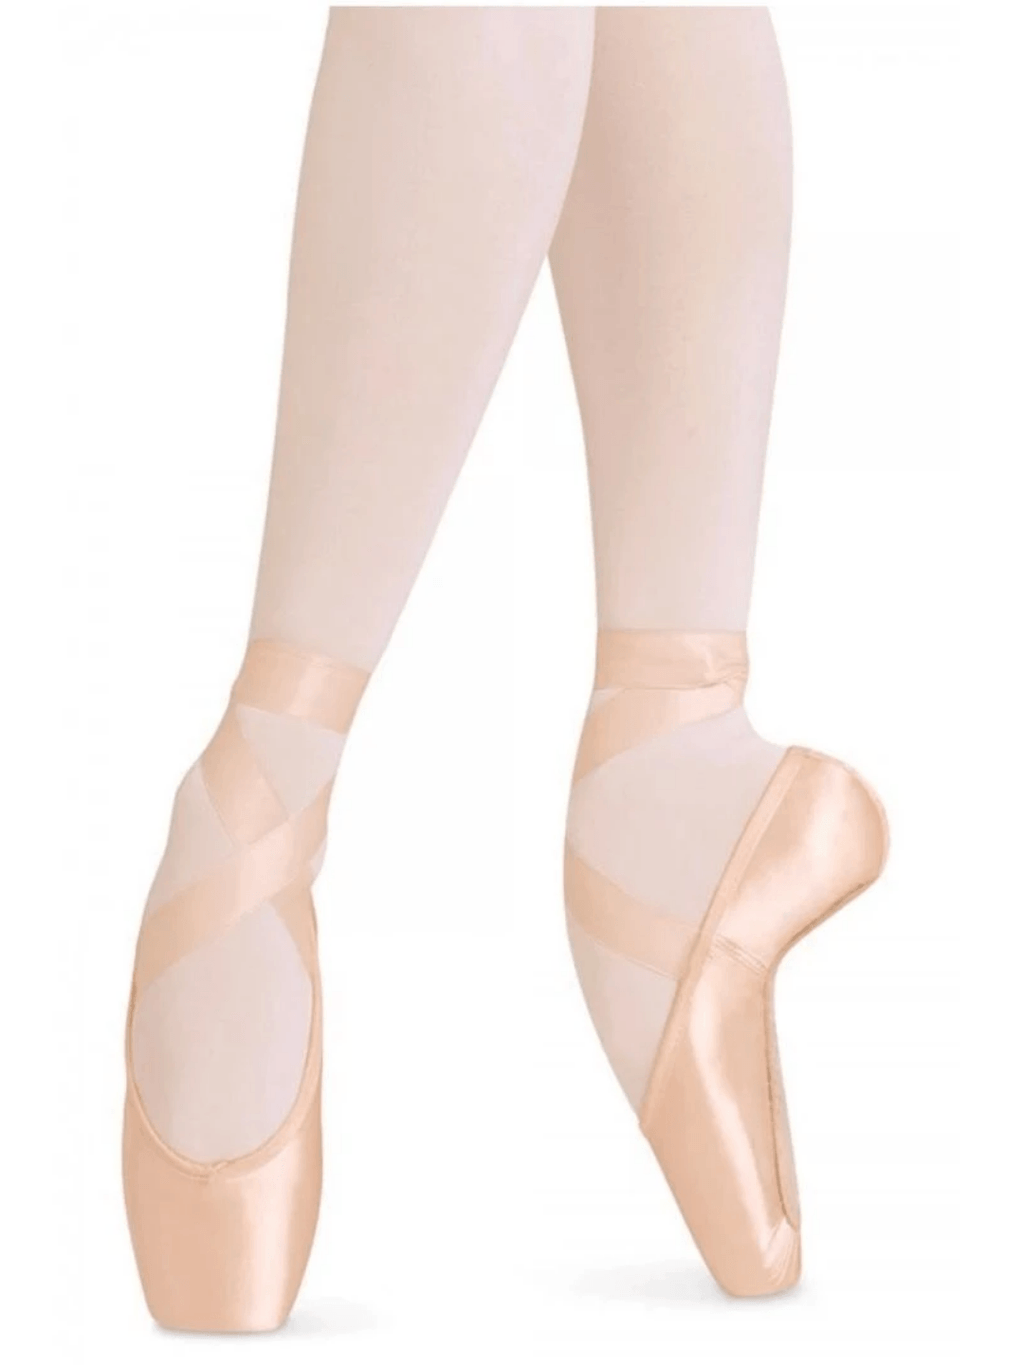 pointe shoes — All About Ballet